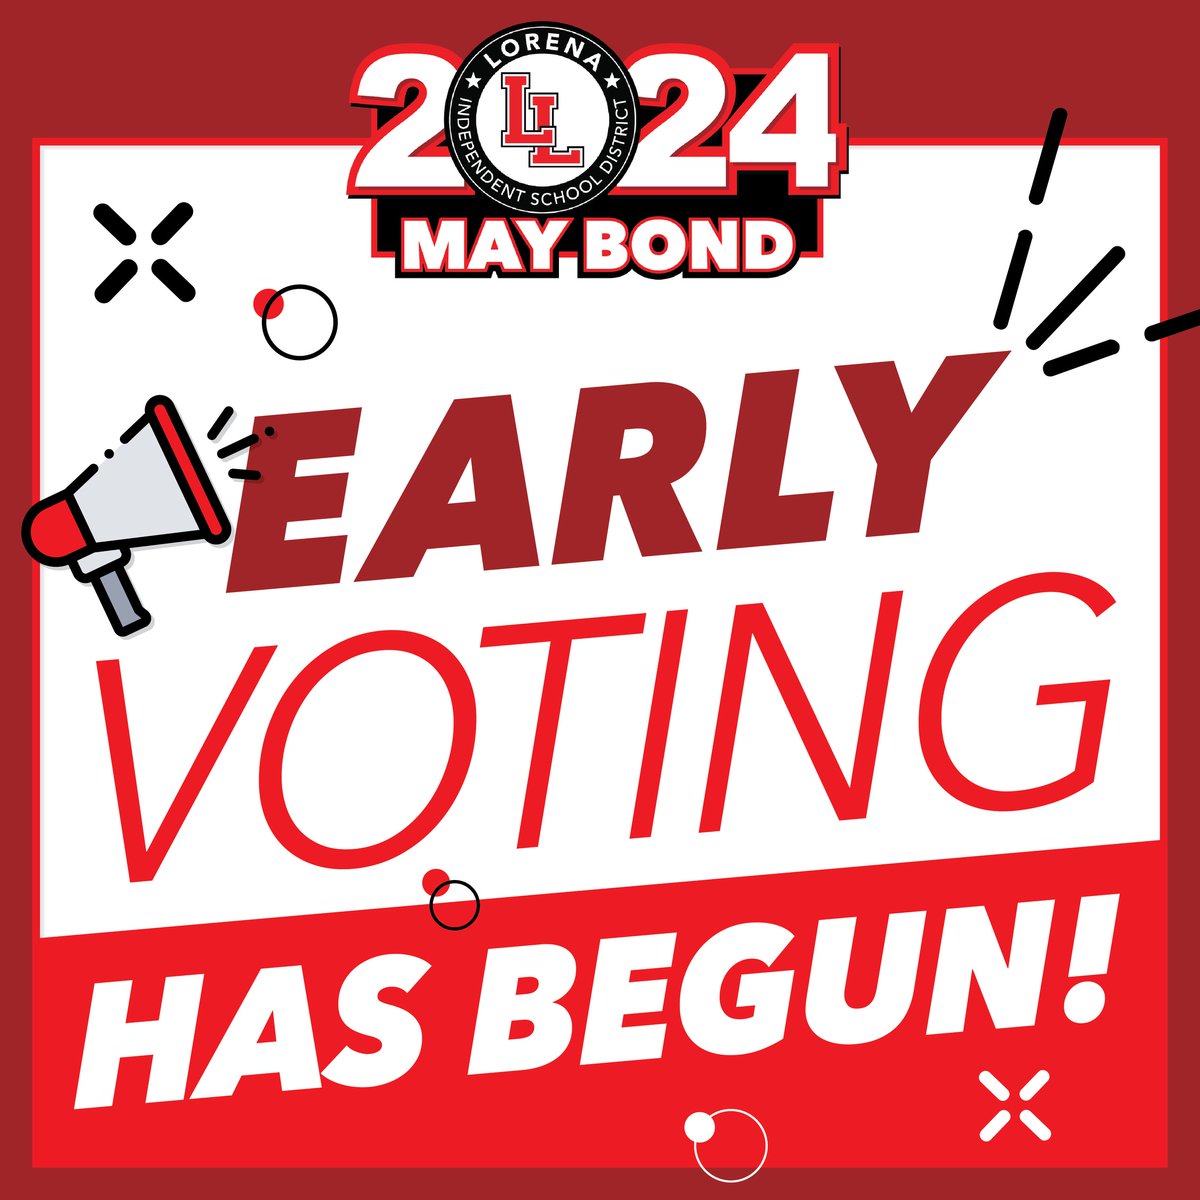 Early Voting is underway and continues through April 30. Visit lorenaisdbond.com/voting for all early voting times & locations.